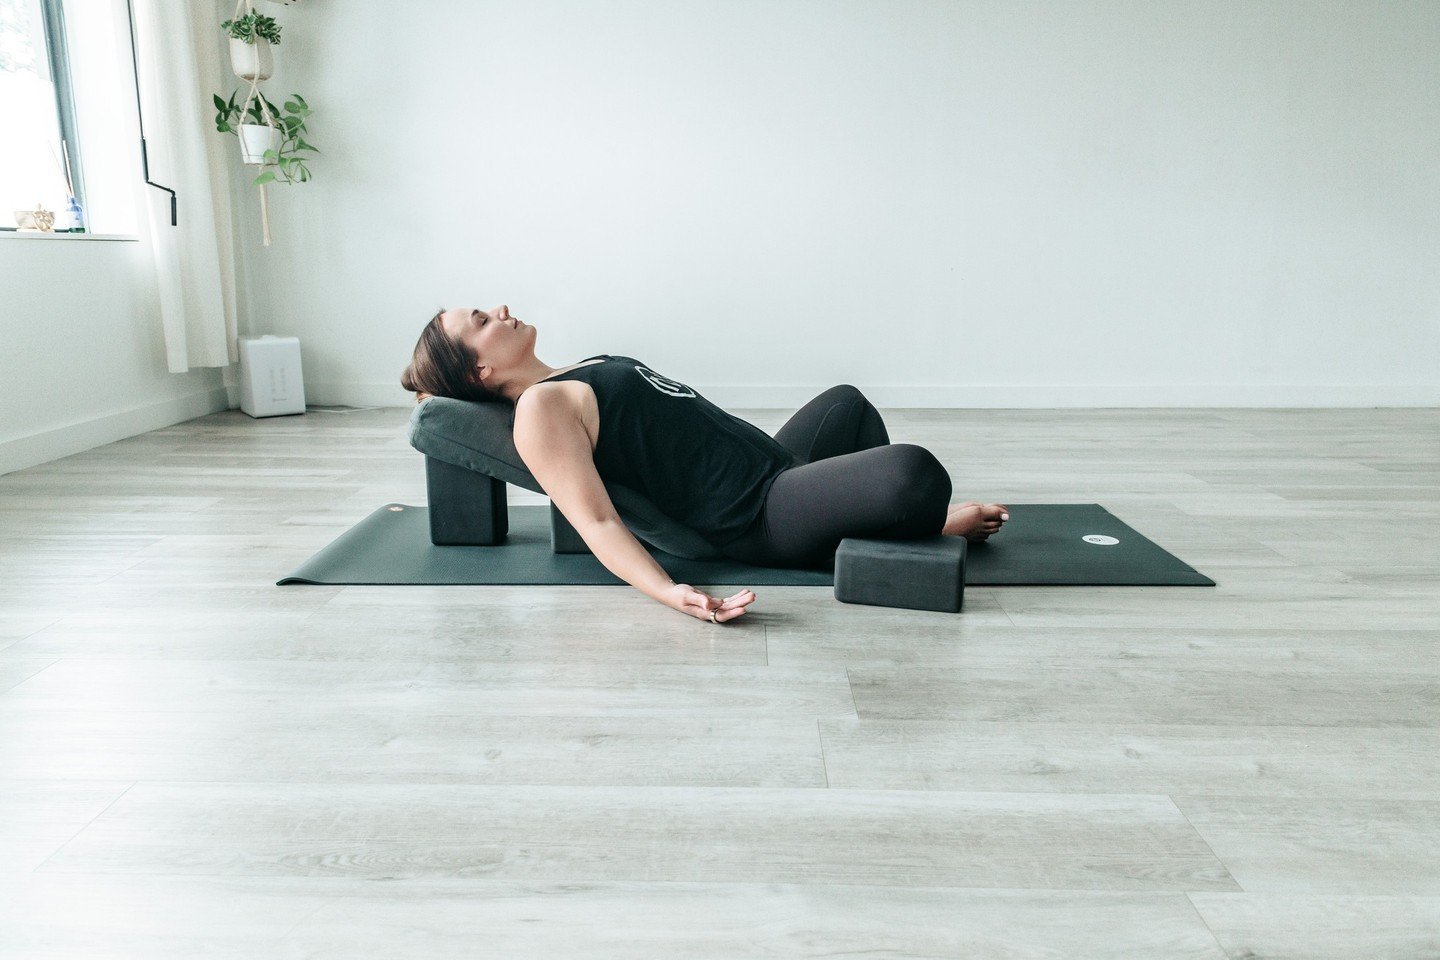 y i n ⁠
⁠
&quot;The body benefits from movement, and the mind benefits from stillness.&quot;⁠
⁠
Join Ashlea every Tuesday night for a Yin Practice guaranteed to invite stillness and peace to your week.